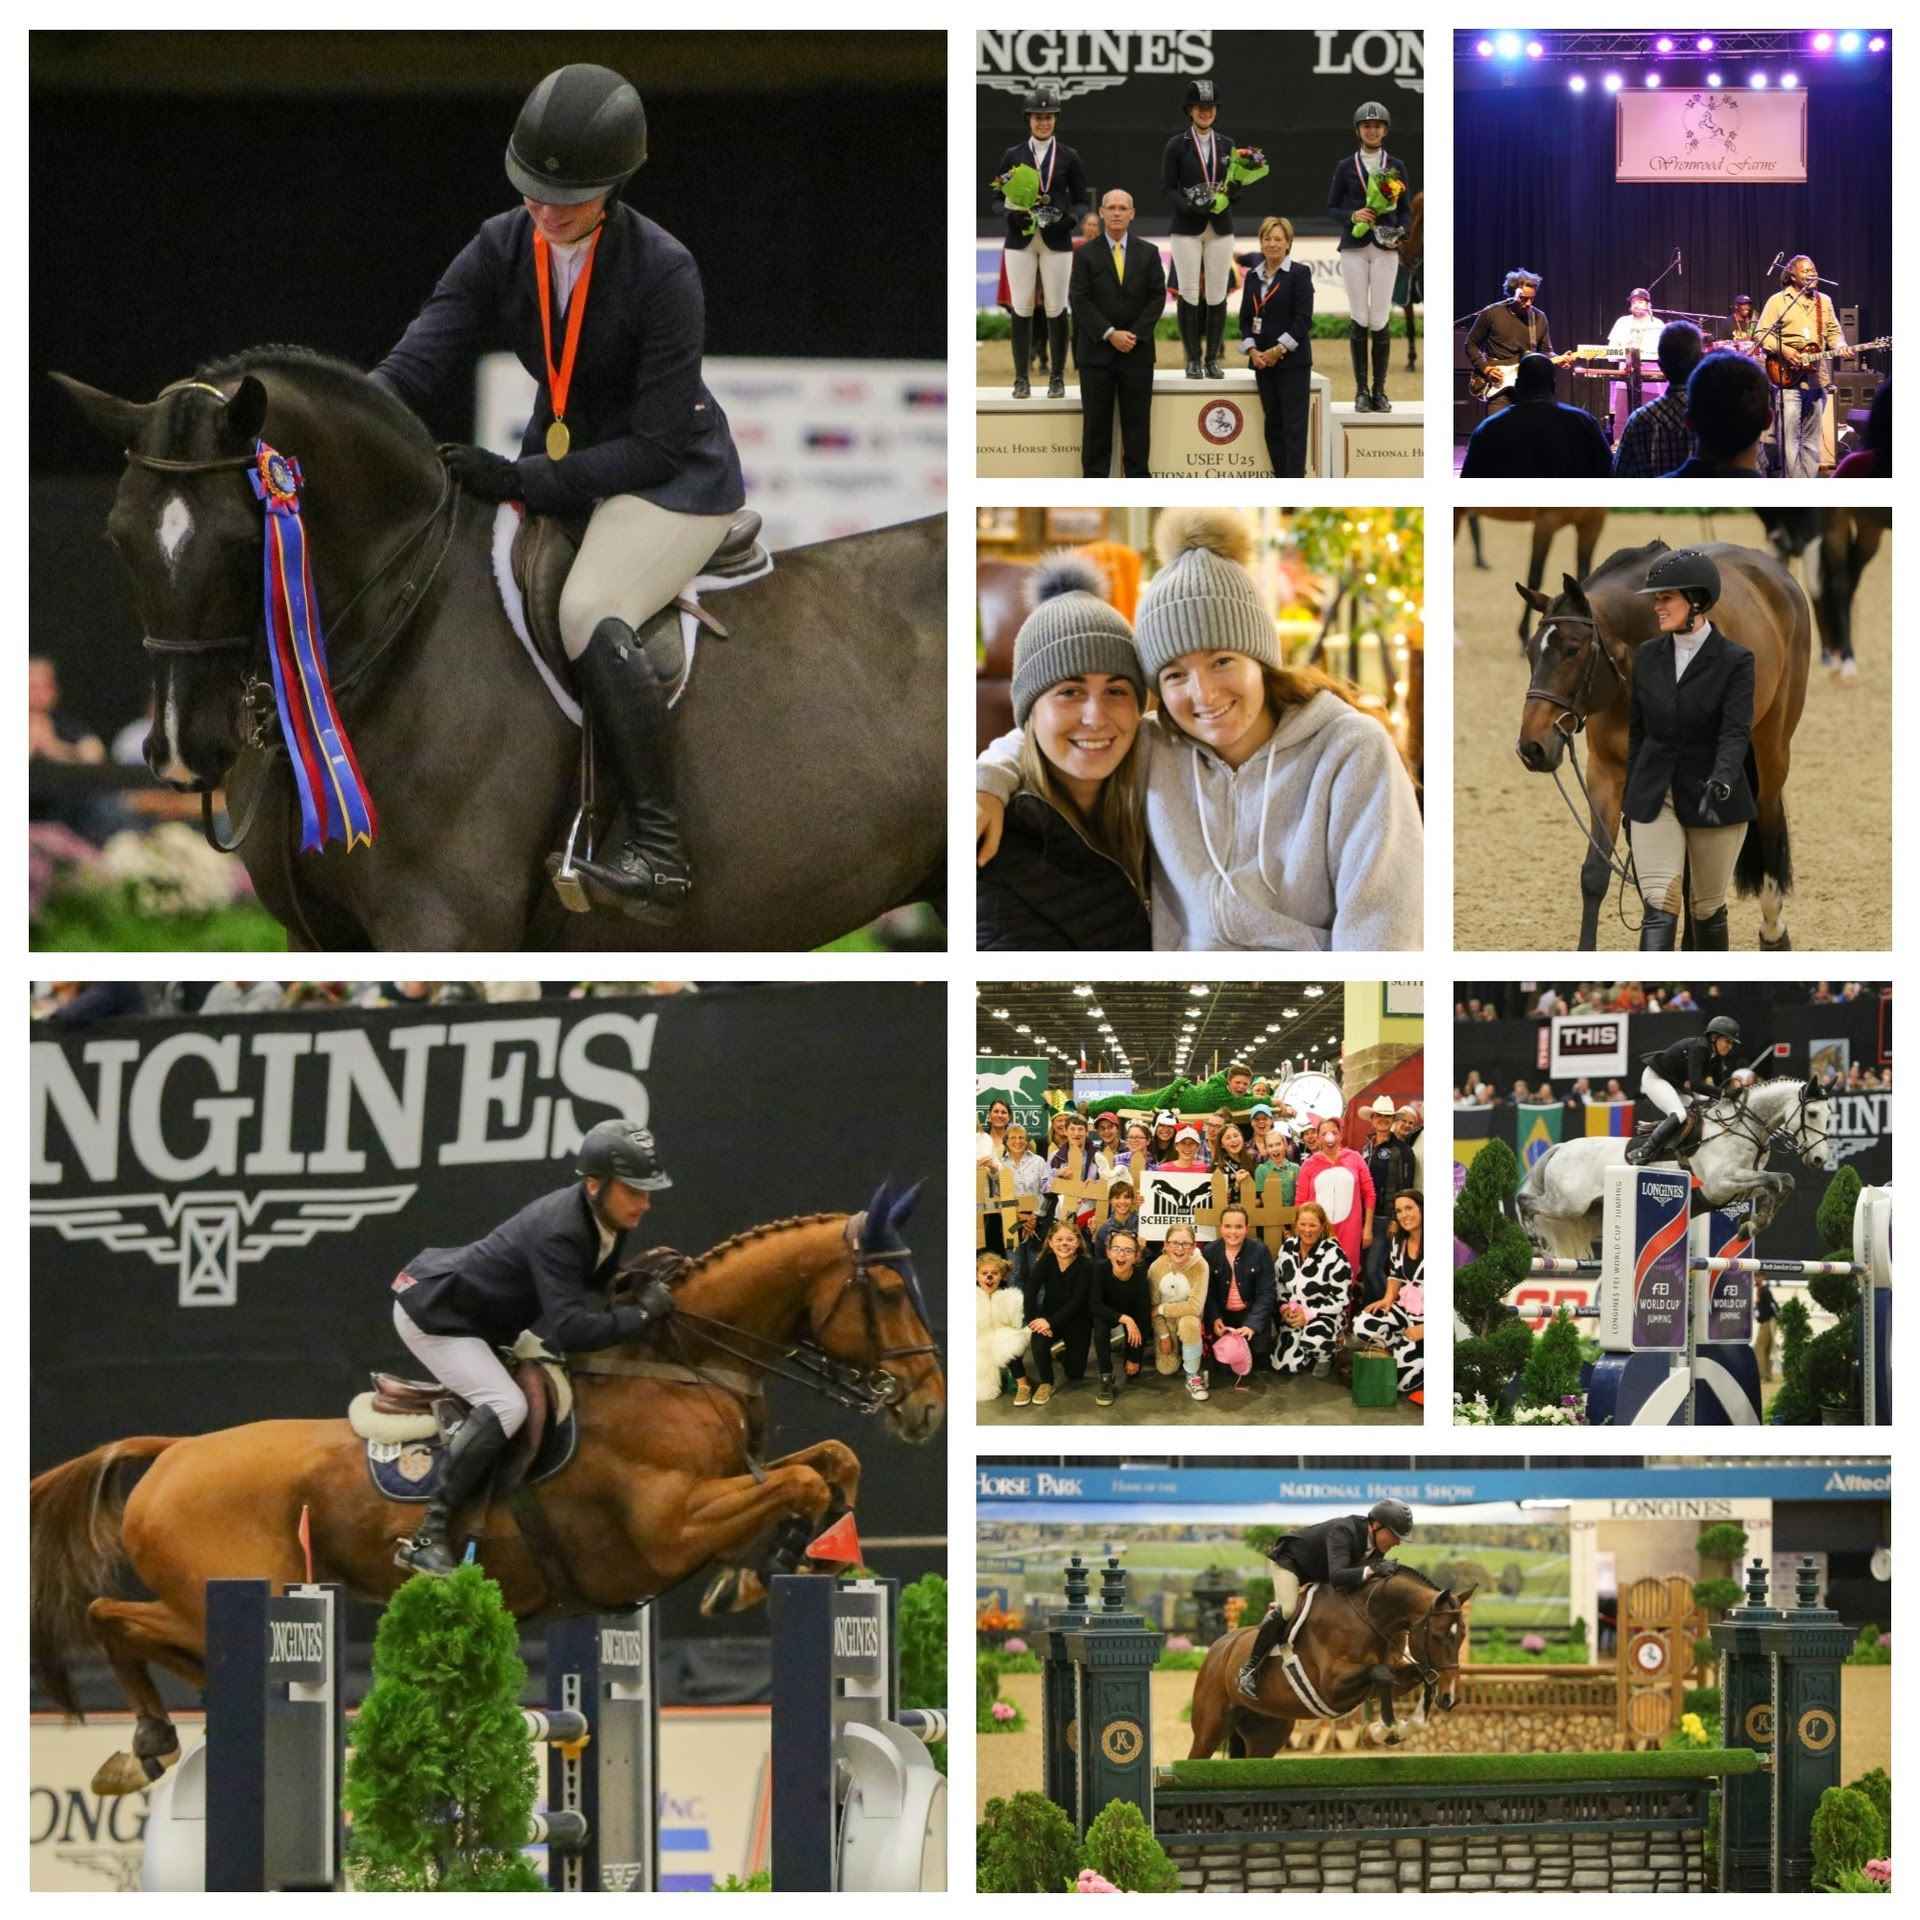 International Equestrian Athletes Gather in Lexington for the National